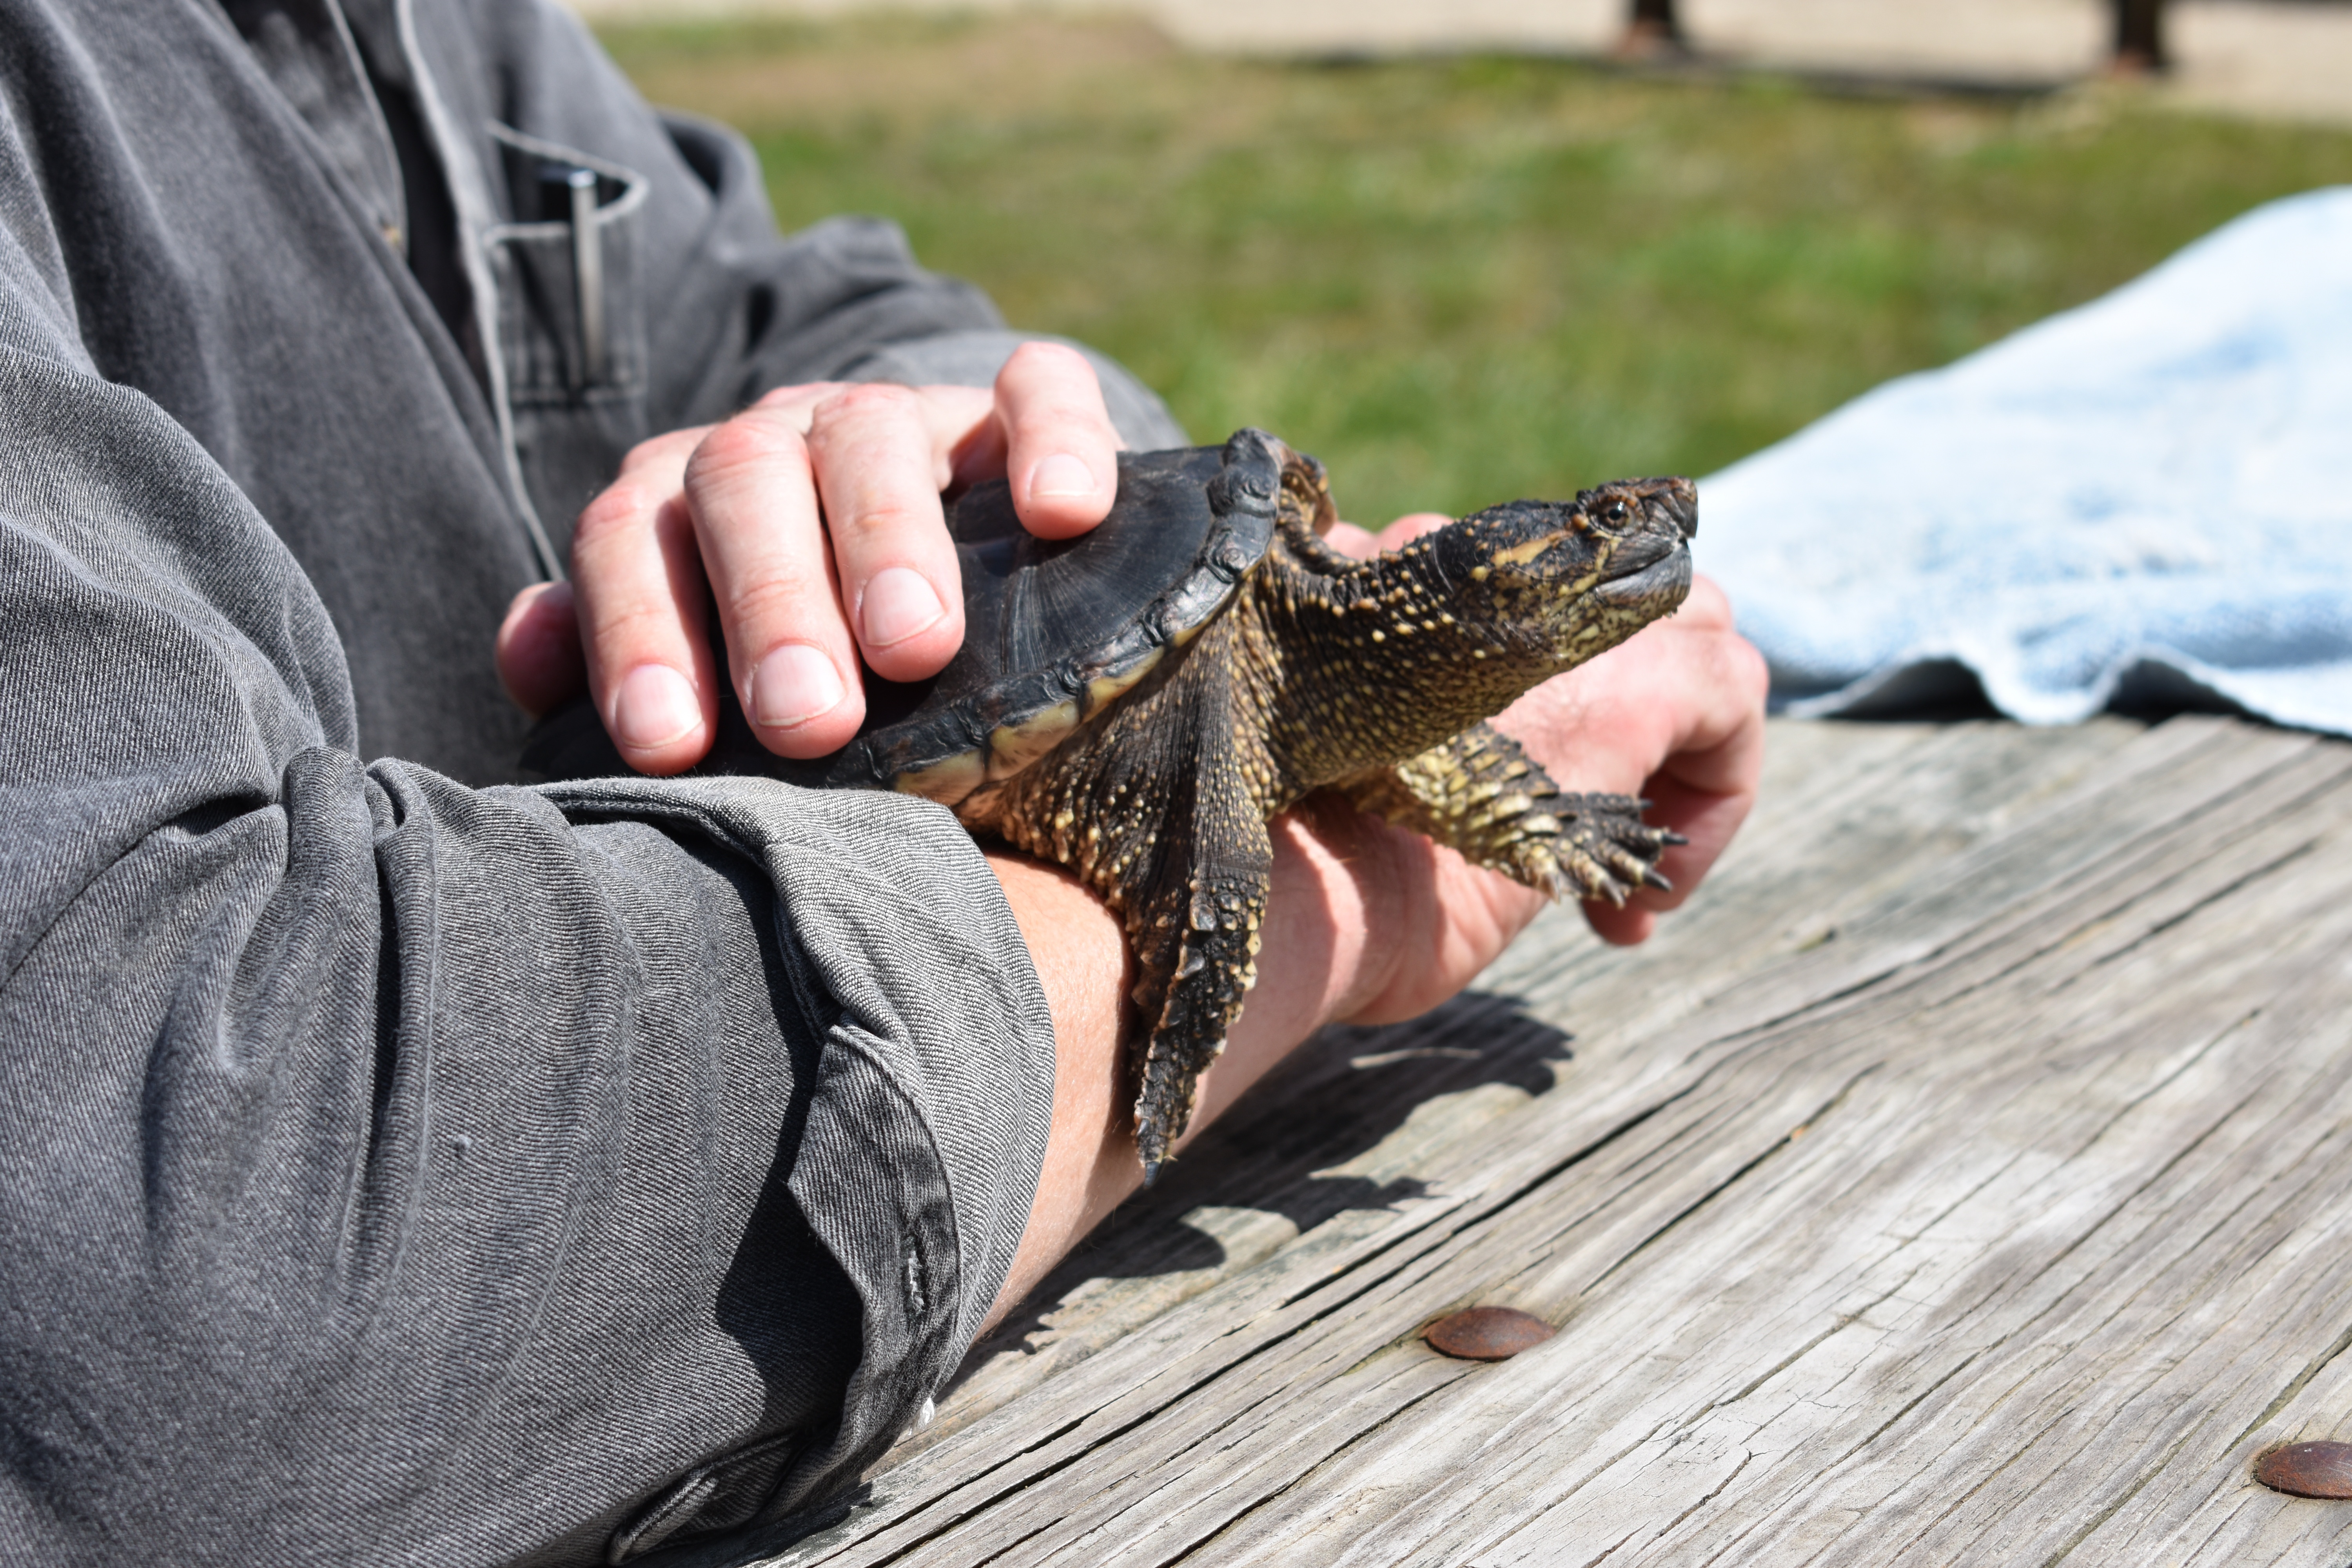 Snap the Snapping Turtle at Hocking College Nature Center | Wildlife Program